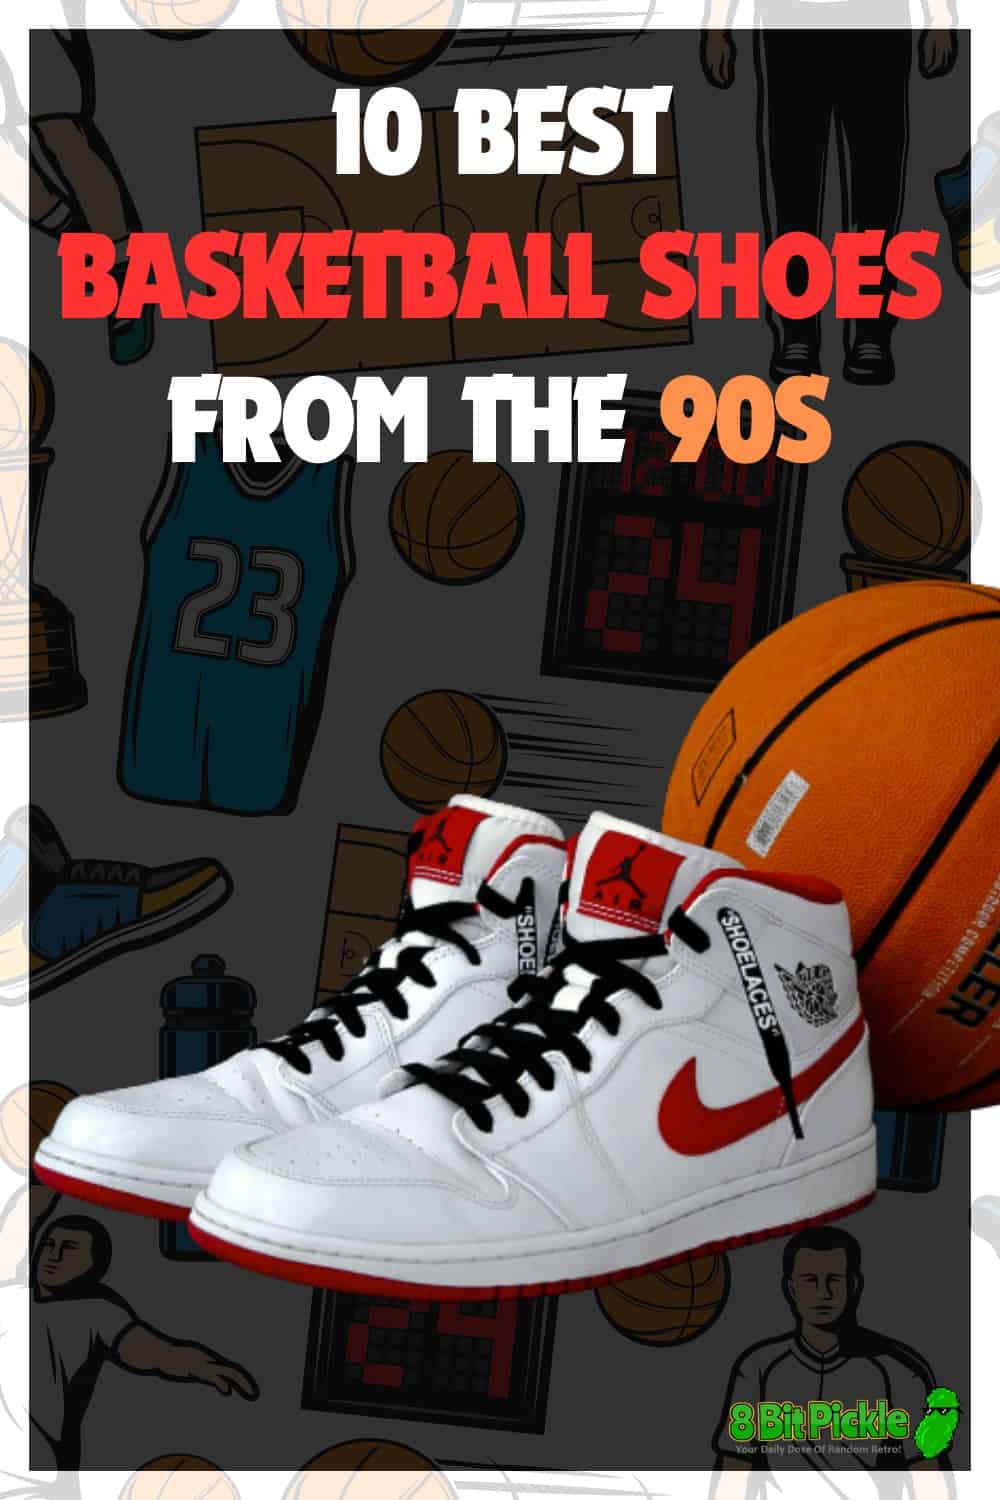 10 Best 90s Basketball Shoes To Get Your Retro NBA Sneaker Fix!